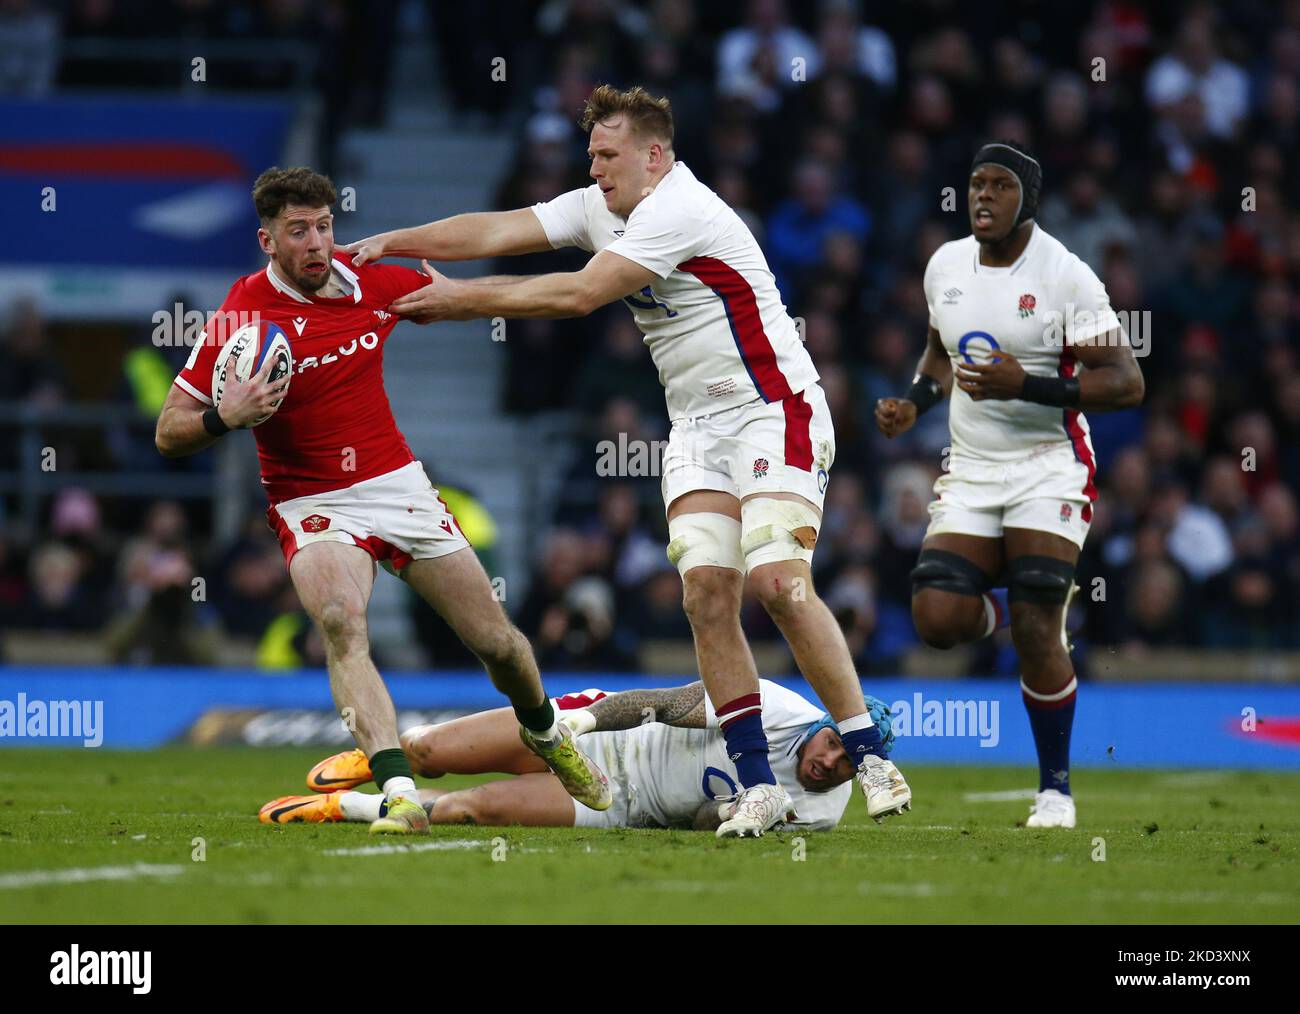 Alex Cuthbert of Wales makes his 50th cap for Wales gets tackled by Alex Dombrandt of England during Guinness six Nations match between England and Wales, at Twickenham Stadium on 26th February,